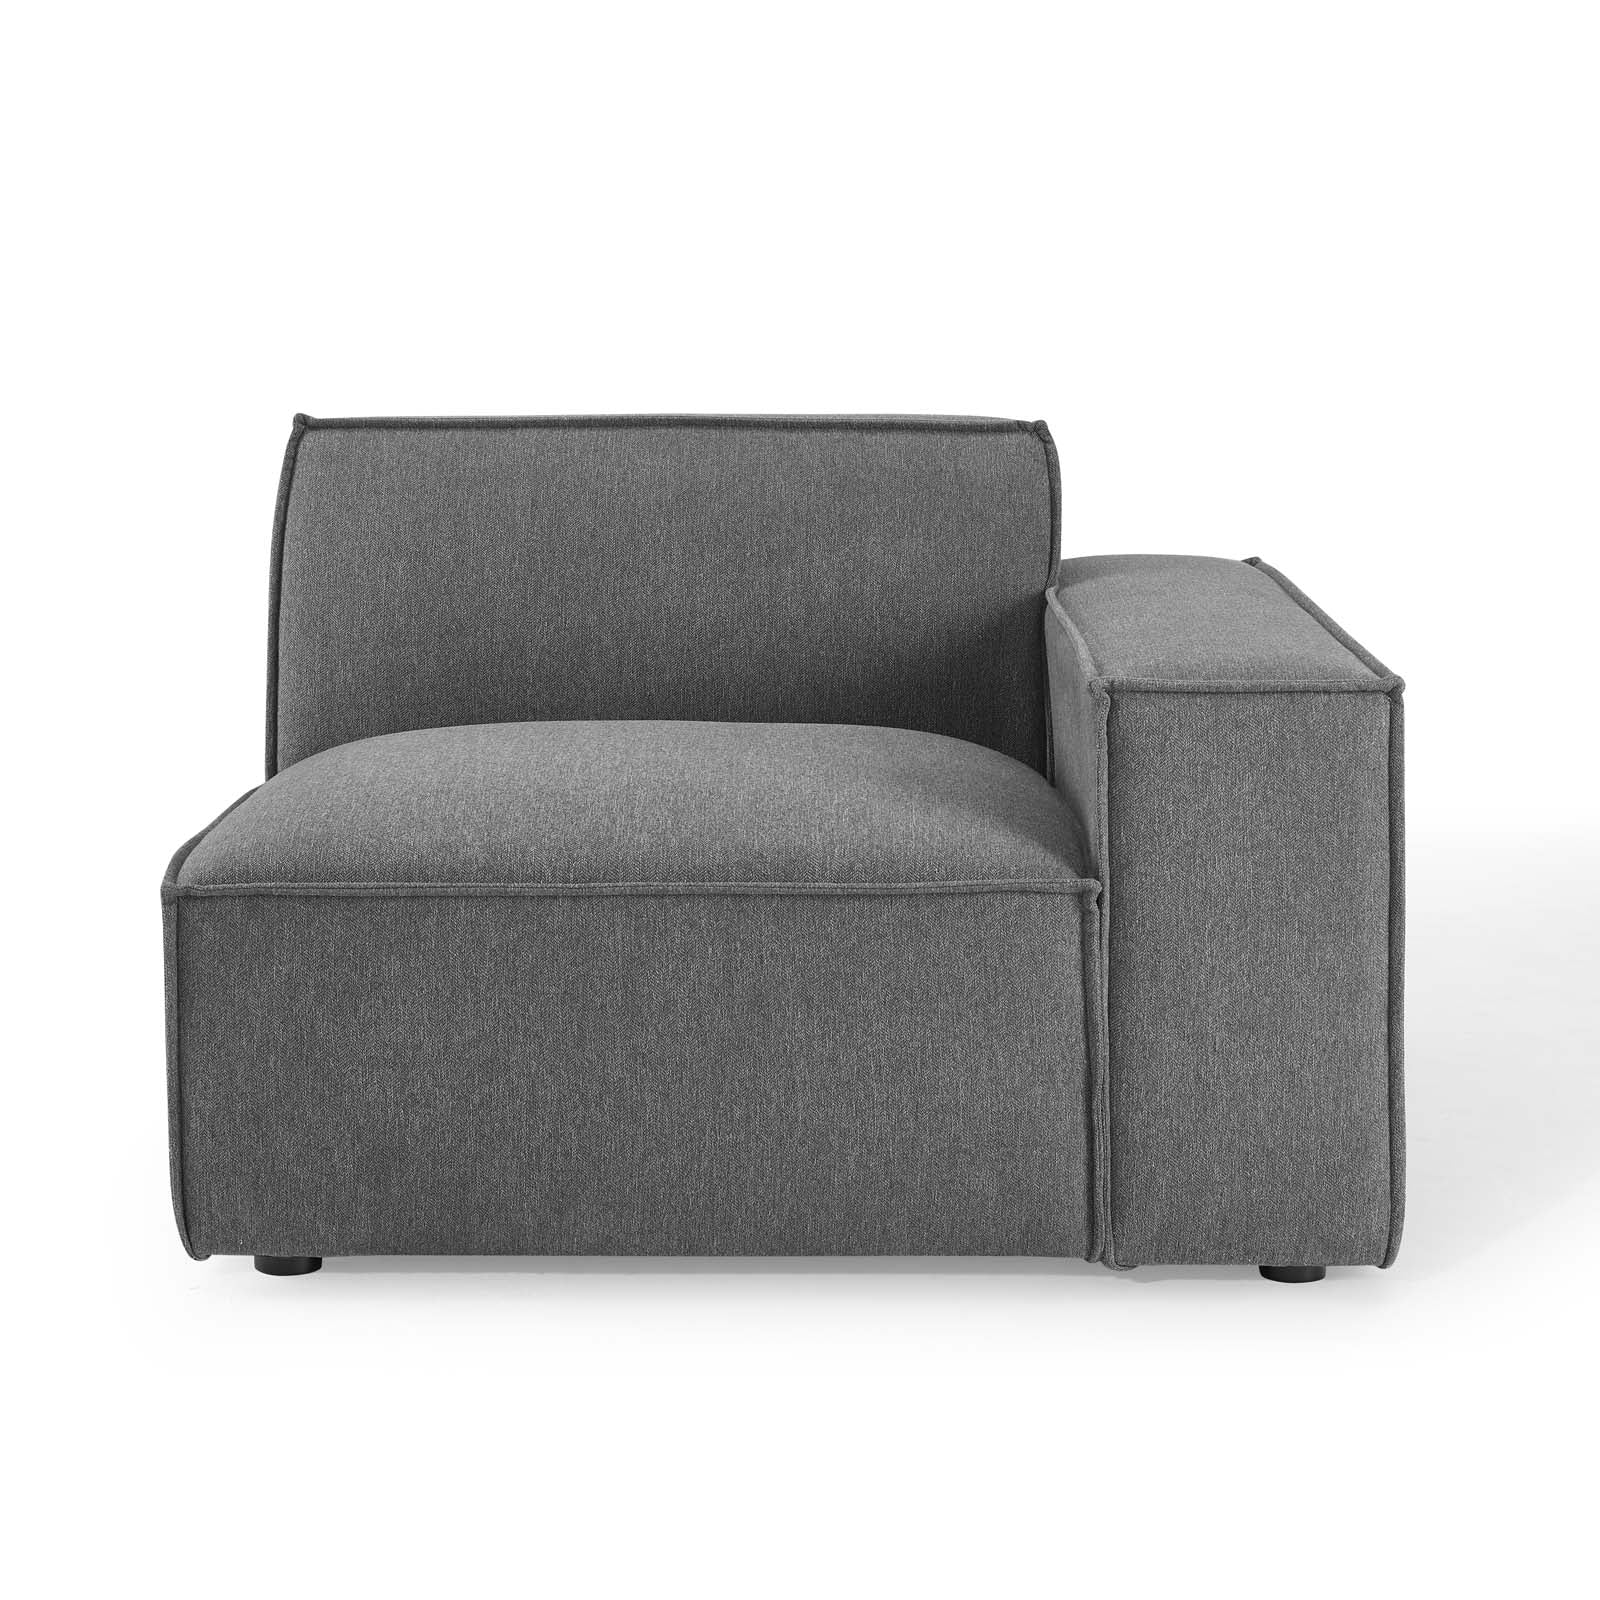 Restore Left-Arm Sectional Sofa Chair